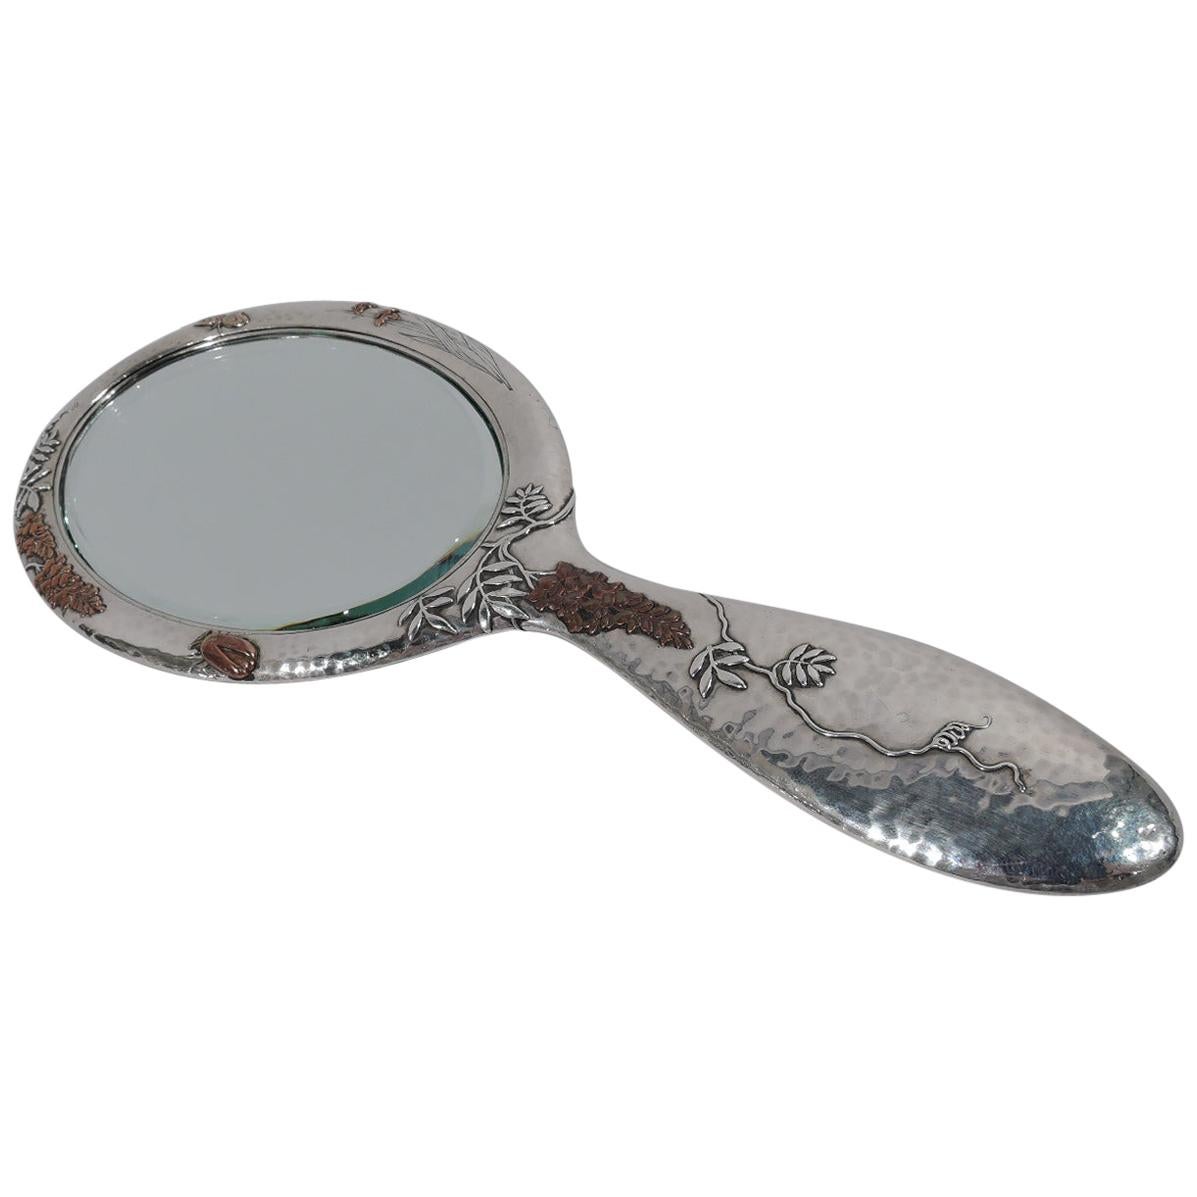 Tiffany & Co. Japonesque Mixed Metal Hand Mirror with Beetle and Butterfly